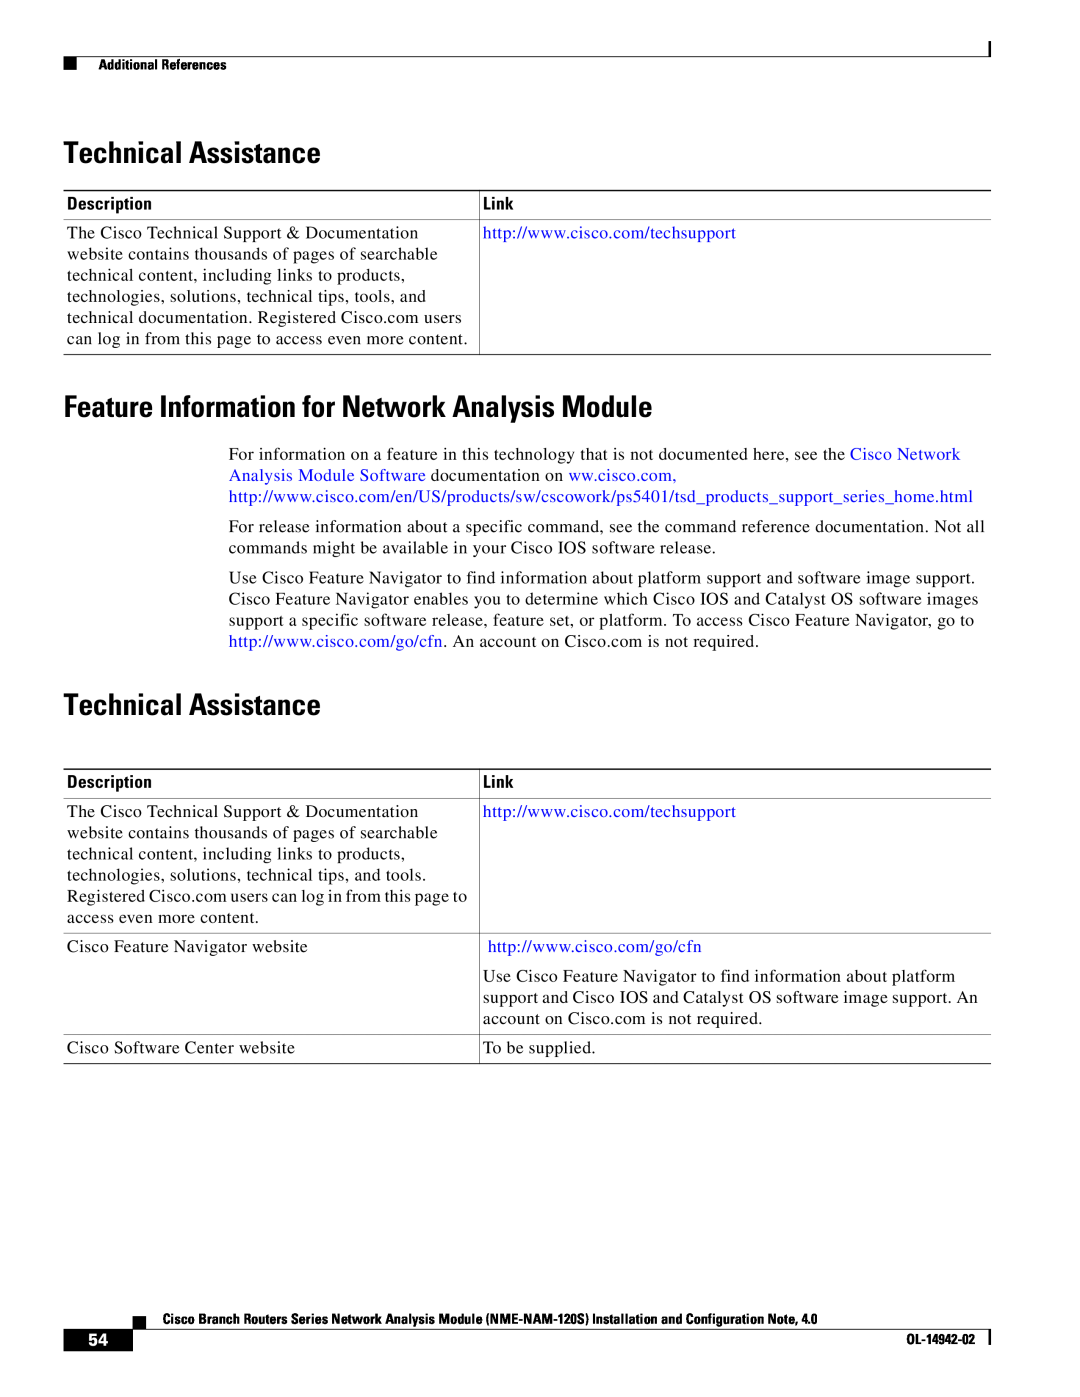 Cisco Systems SMNMADPTR manual Technical Assistance, Feature Information for Network Analysis Module, Link, Description 